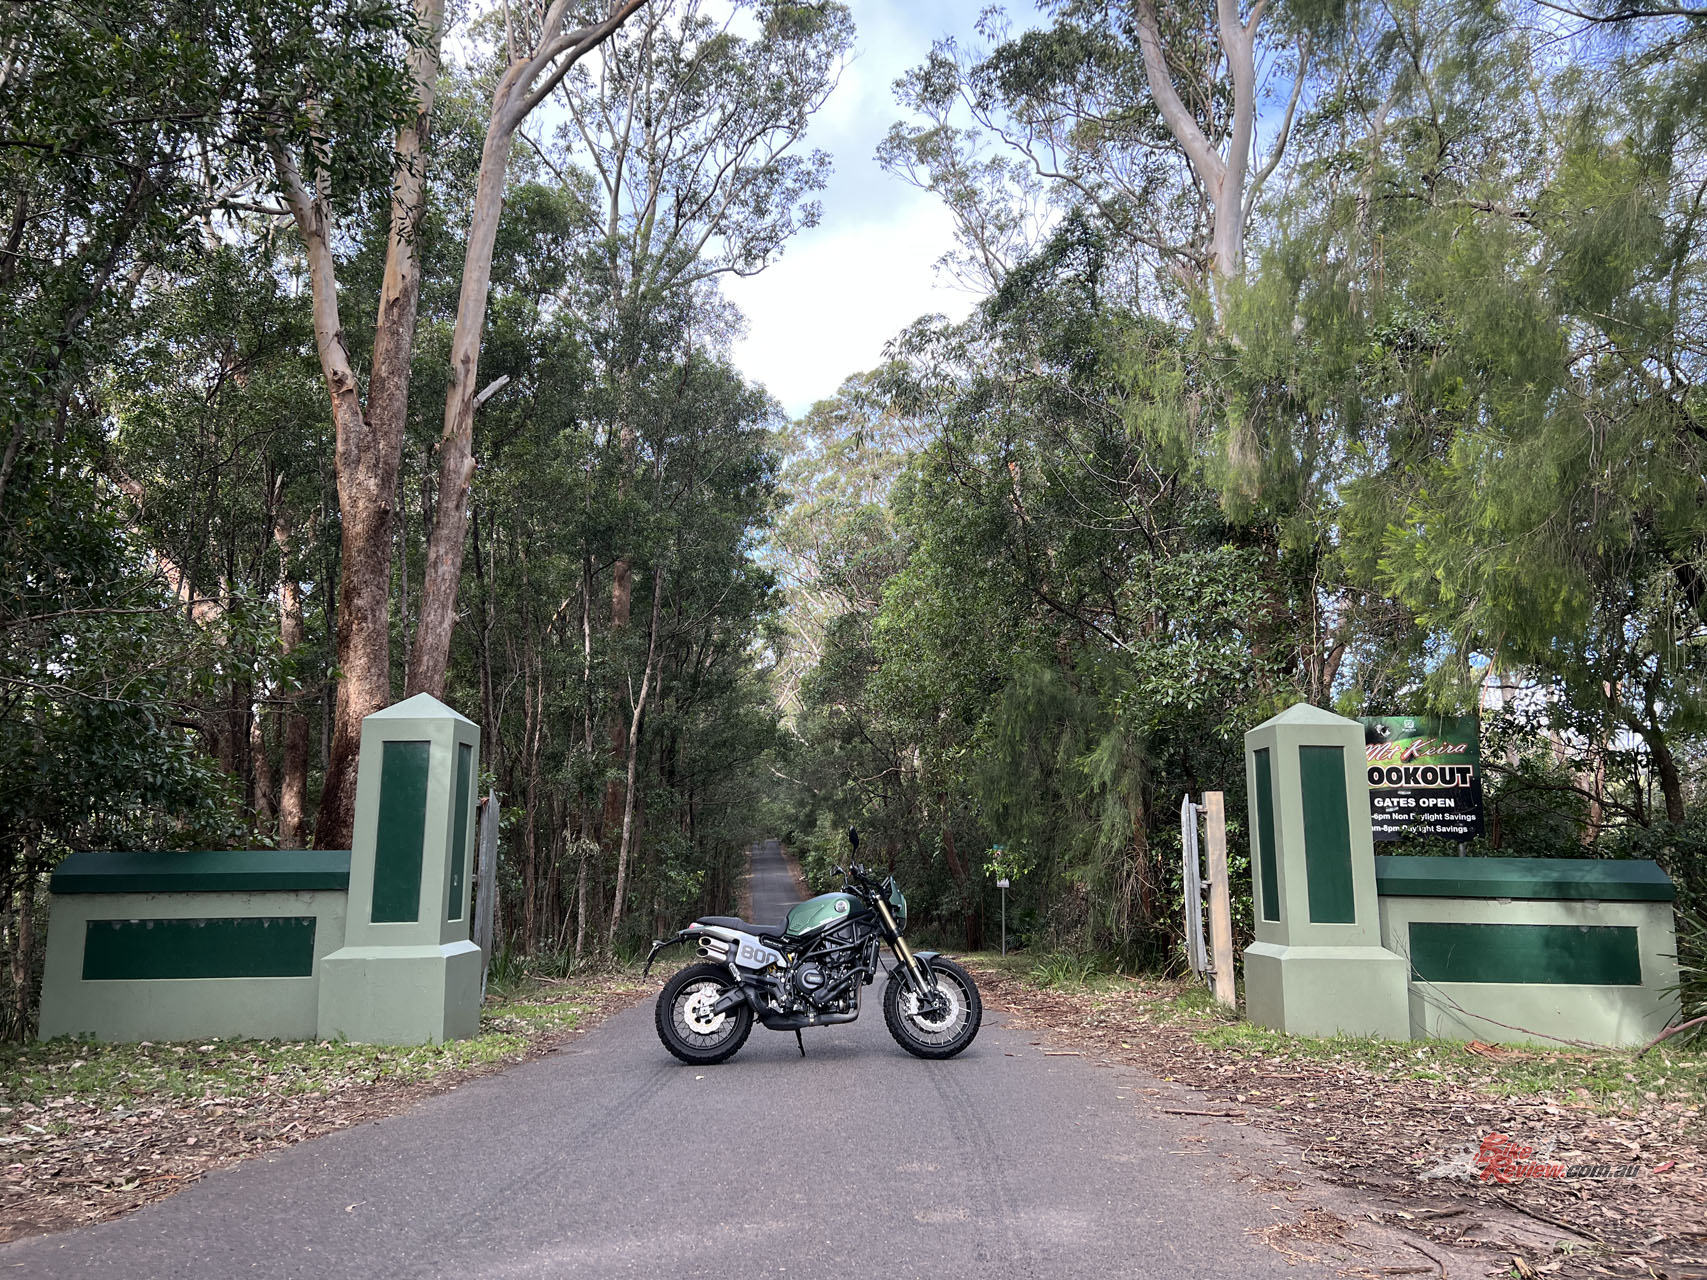 There are seriously so many cool lookouts, awesome riding roads and picnic locations all within a few KM.